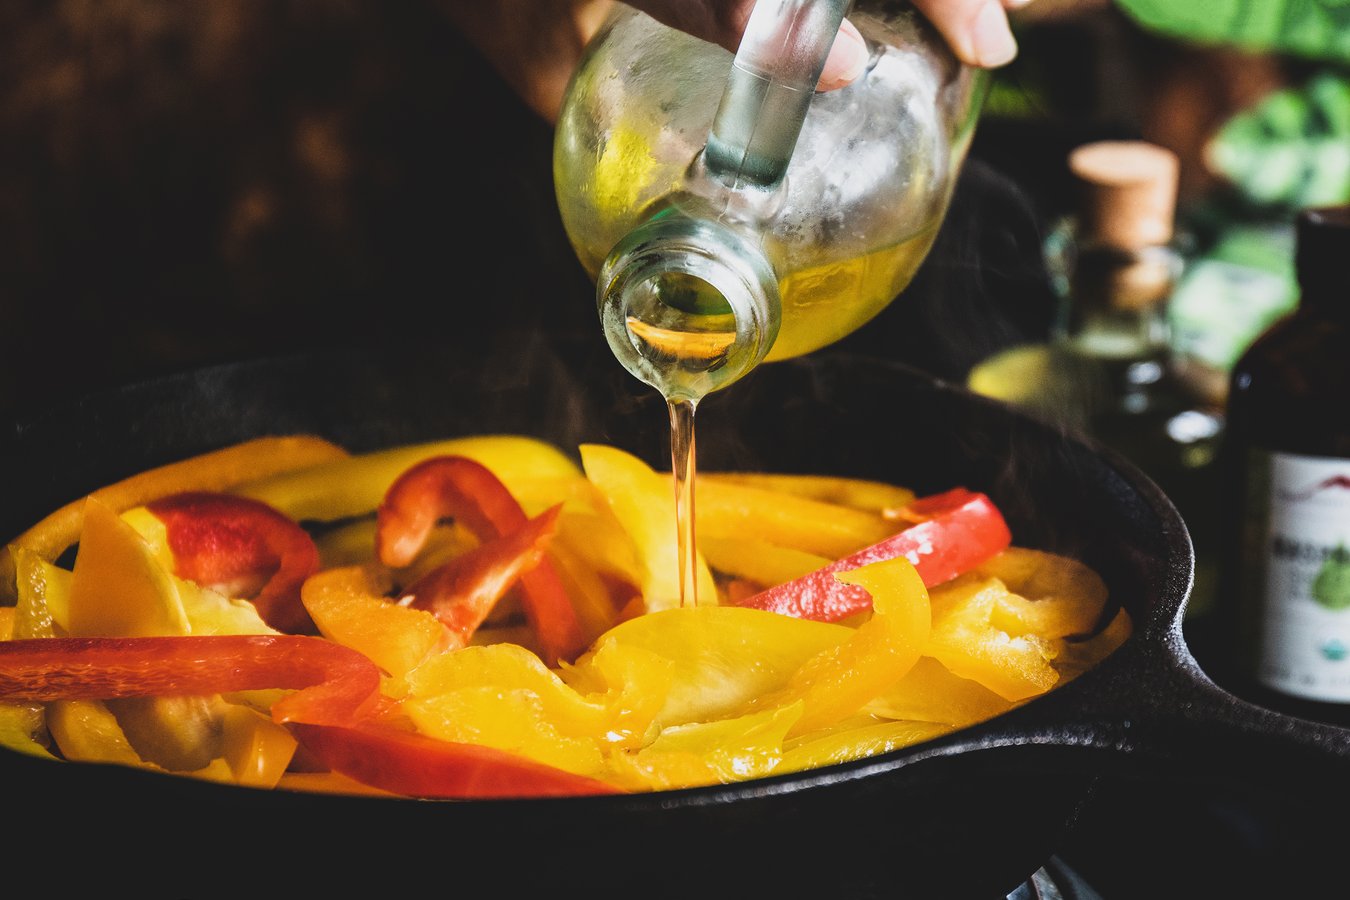 Best Oil for Frying: How to Clean Deep Fryer Oil & More